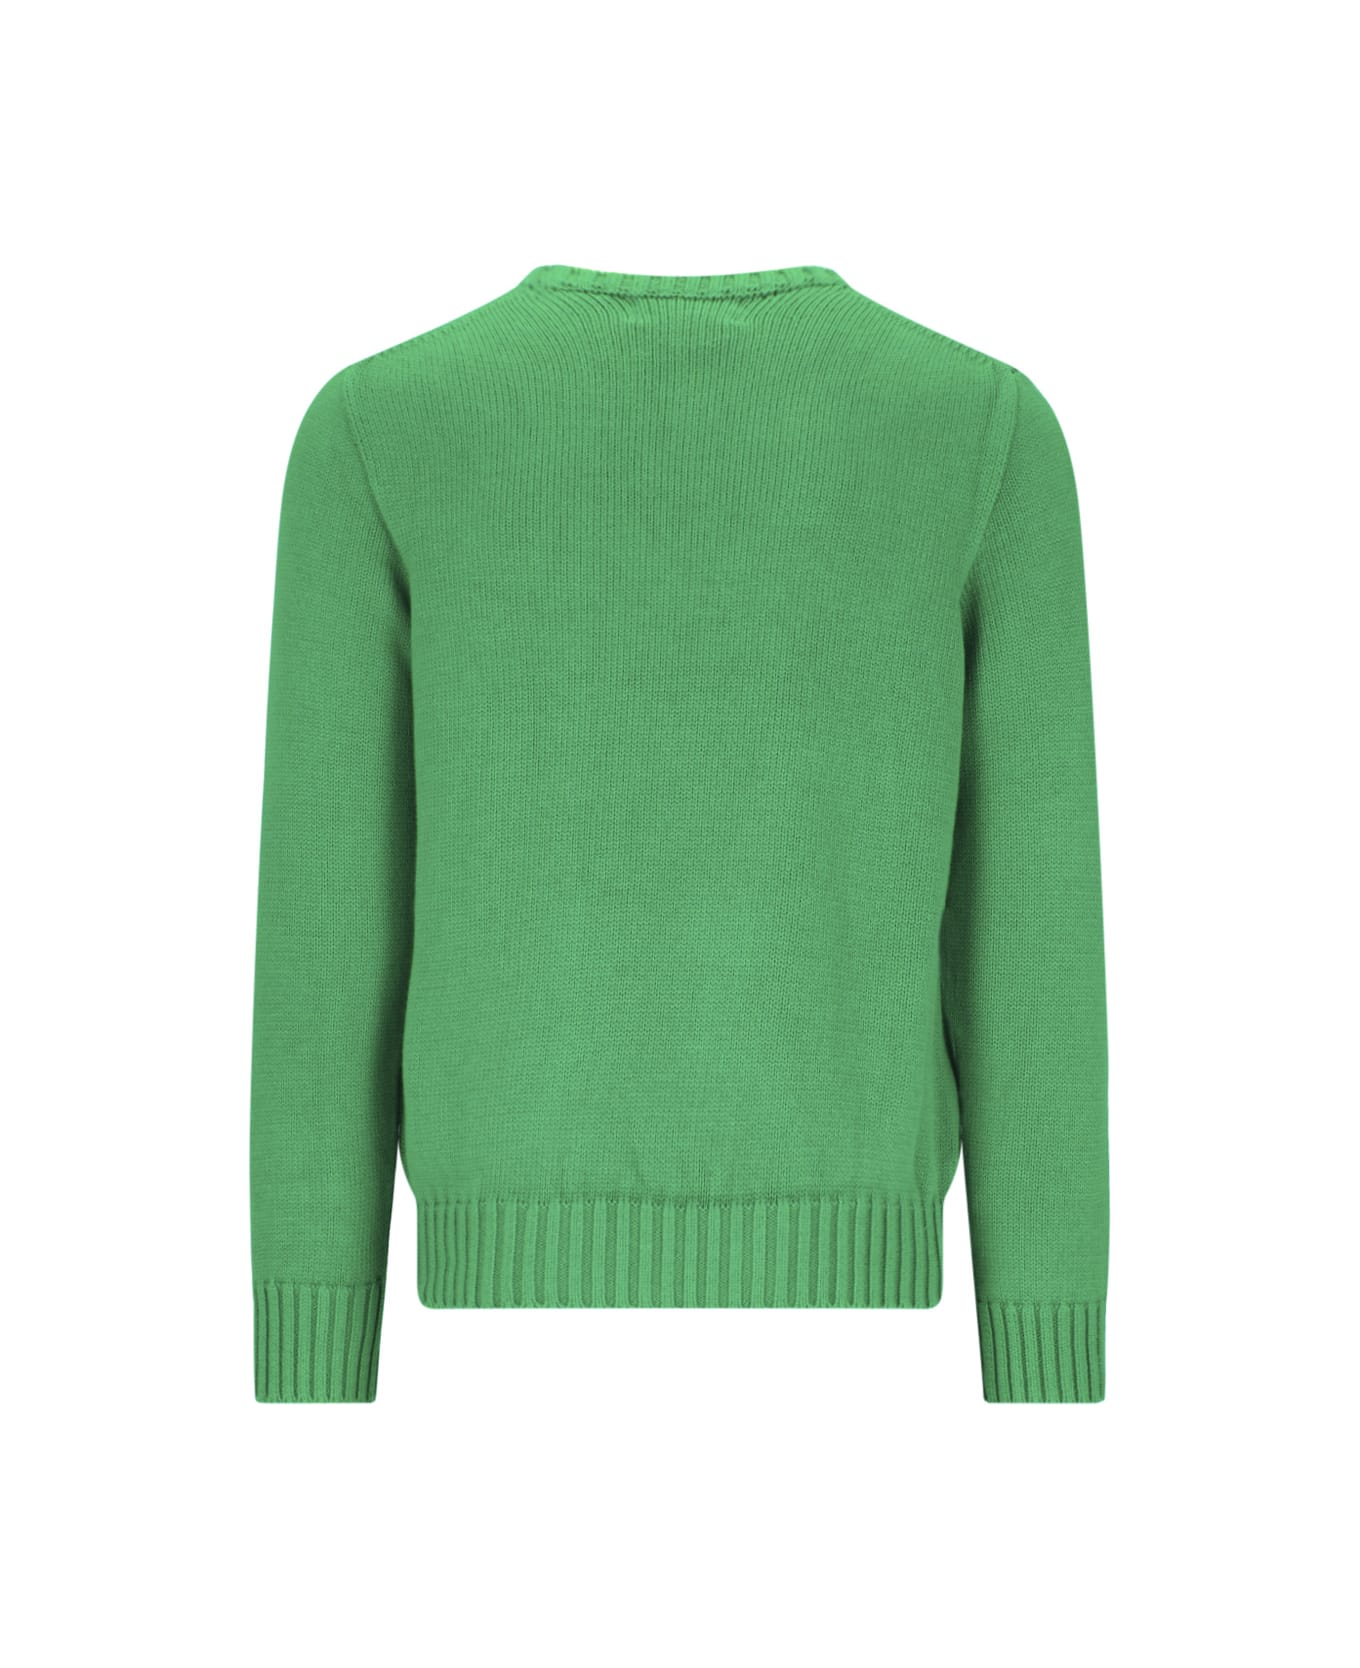 Polo Ralph Lauren Iconic Embroidery Sweater - GREEN